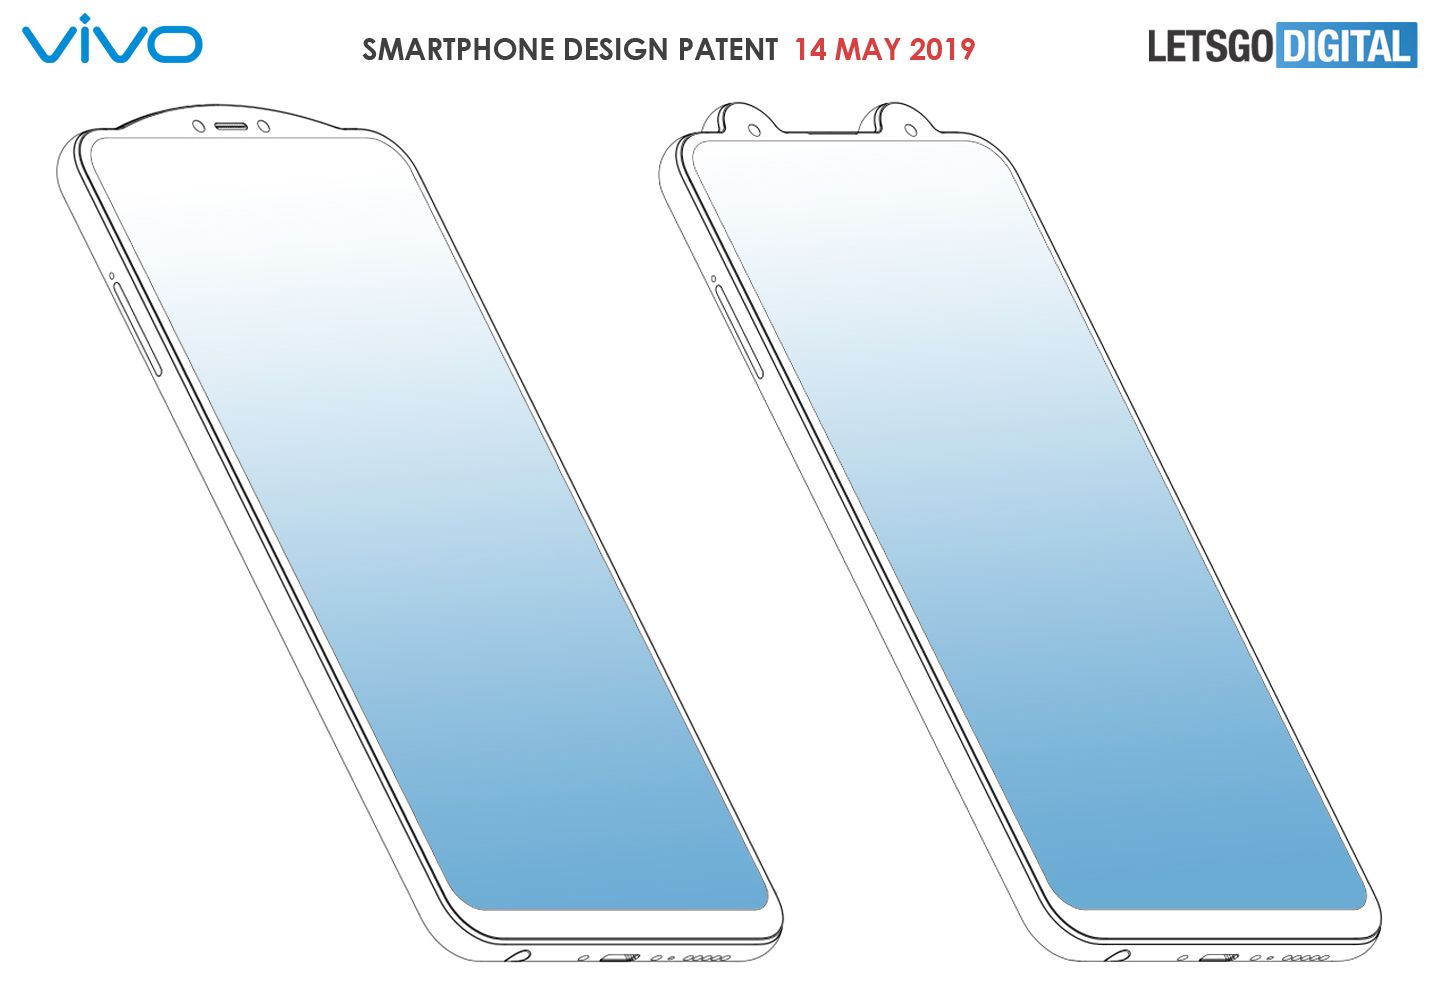 Vivo patents reveal phones with reverse notch image 2